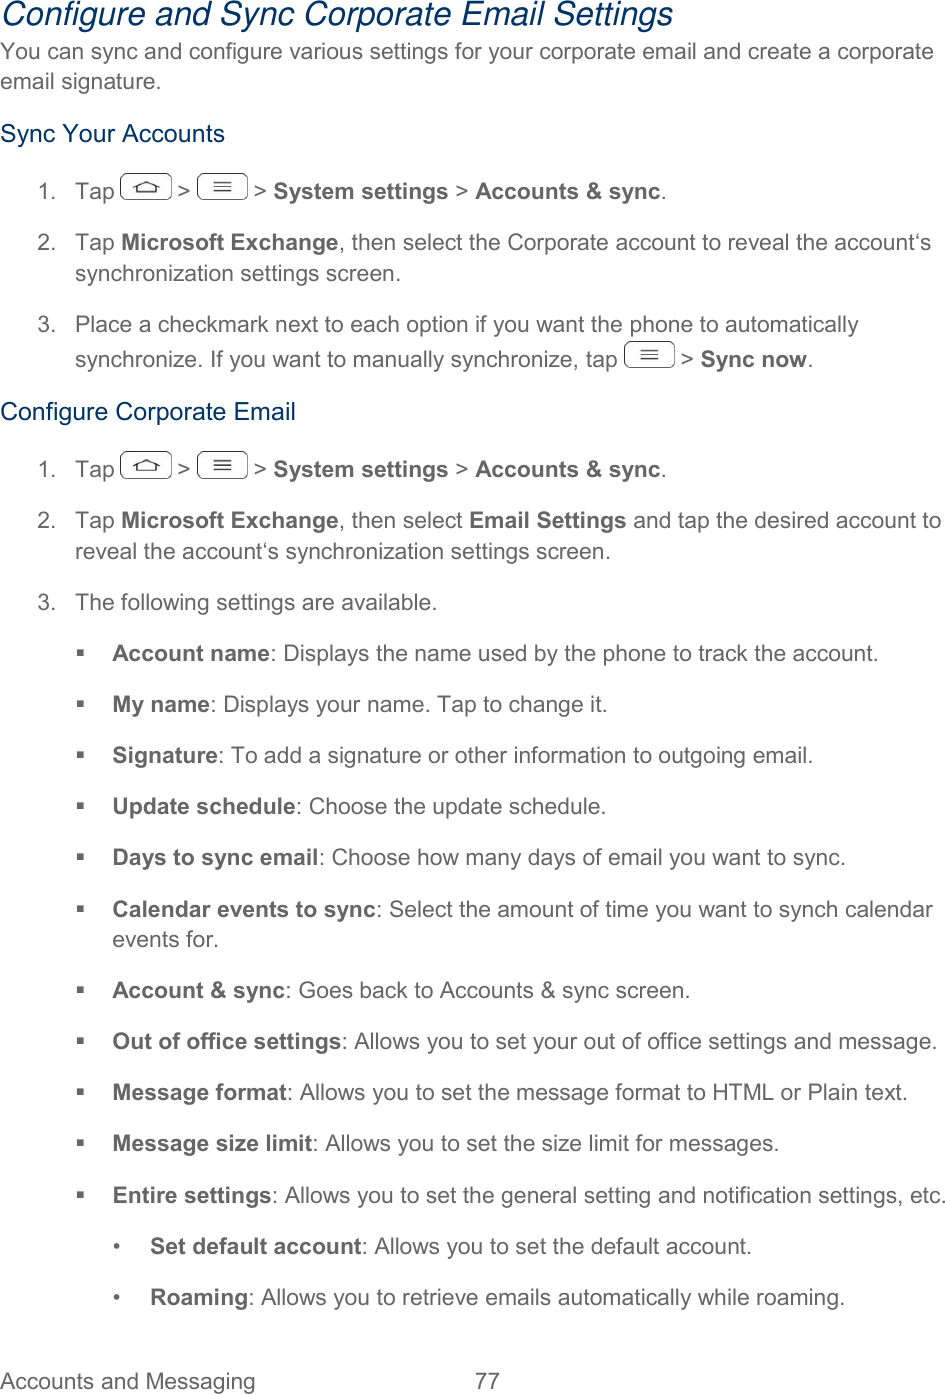  Accounts and Messaging  77   Configure and Sync Corporate Email Settings You can sync and configure various settings for your corporate email and create a corporate email signature. Sync Your Accounts 1.  Tap   &gt;   &gt; System settings &gt; Accounts &amp; sync. 2.  Tap Microsoft Exchange, then select the Corporate account to reveal the account‘s synchronization settings screen. 3.  Place a checkmark next to each option if you want the phone to automatically synchronize. If you want to manually synchronize, tap   &gt; Sync now. Configure Corporate Email 1.  Tap   &gt;   &gt; System settings &gt; Accounts &amp; sync. 2.  Tap Microsoft Exchange, then select Email Settings and tap the desired account to reveal the account‘s synchronization settings screen. 3.  The following settings are available.  Account name: Displays the name used by the phone to track the account.  My name: Displays your name. Tap to change it.  Signature: To add a signature or other information to outgoing email.  Update schedule: Choose the update schedule.  Days to sync email: Choose how many days of email you want to sync.  Calendar events to sync: Select the amount of time you want to synch calendar events for.  Account &amp; sync: Goes back to Accounts &amp; sync screen.  Out of office settings: Allows you to set your out of office settings and message.  Message format: Allows you to set the message format to HTML or Plain text.  Message size limit: Allows you to set the size limit for messages.  Entire settings: Allows you to set the general setting and notification settings, etc. •  Set default account: Allows you to set the default account. •  Roaming: Allows you to retrieve emails automatically while roaming. 